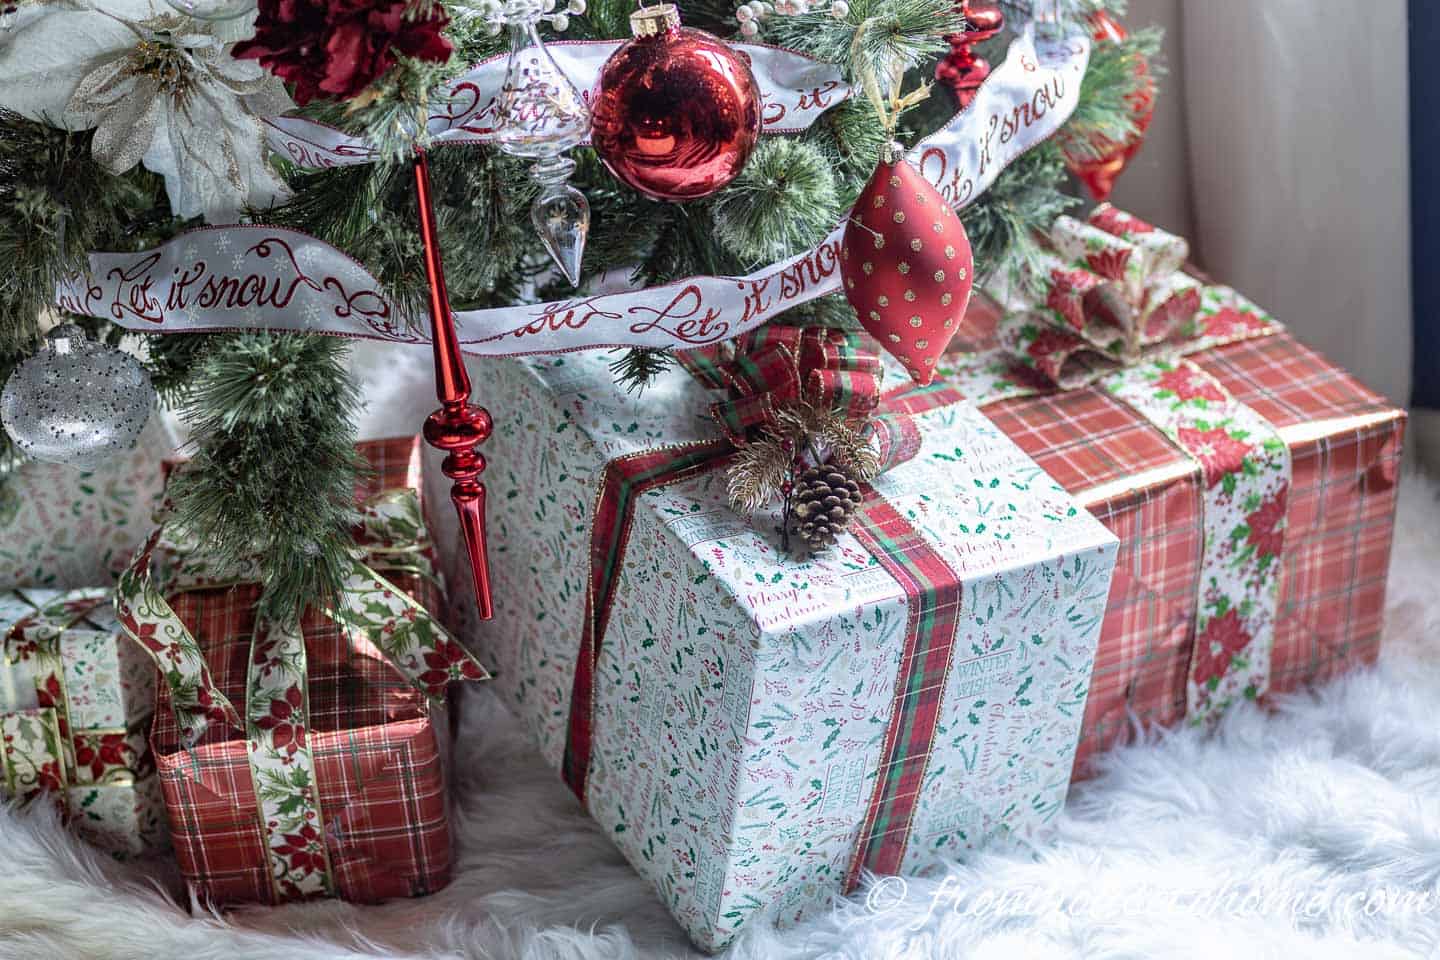 Close up of presents wrapped in white and red wrapping paper under the tree